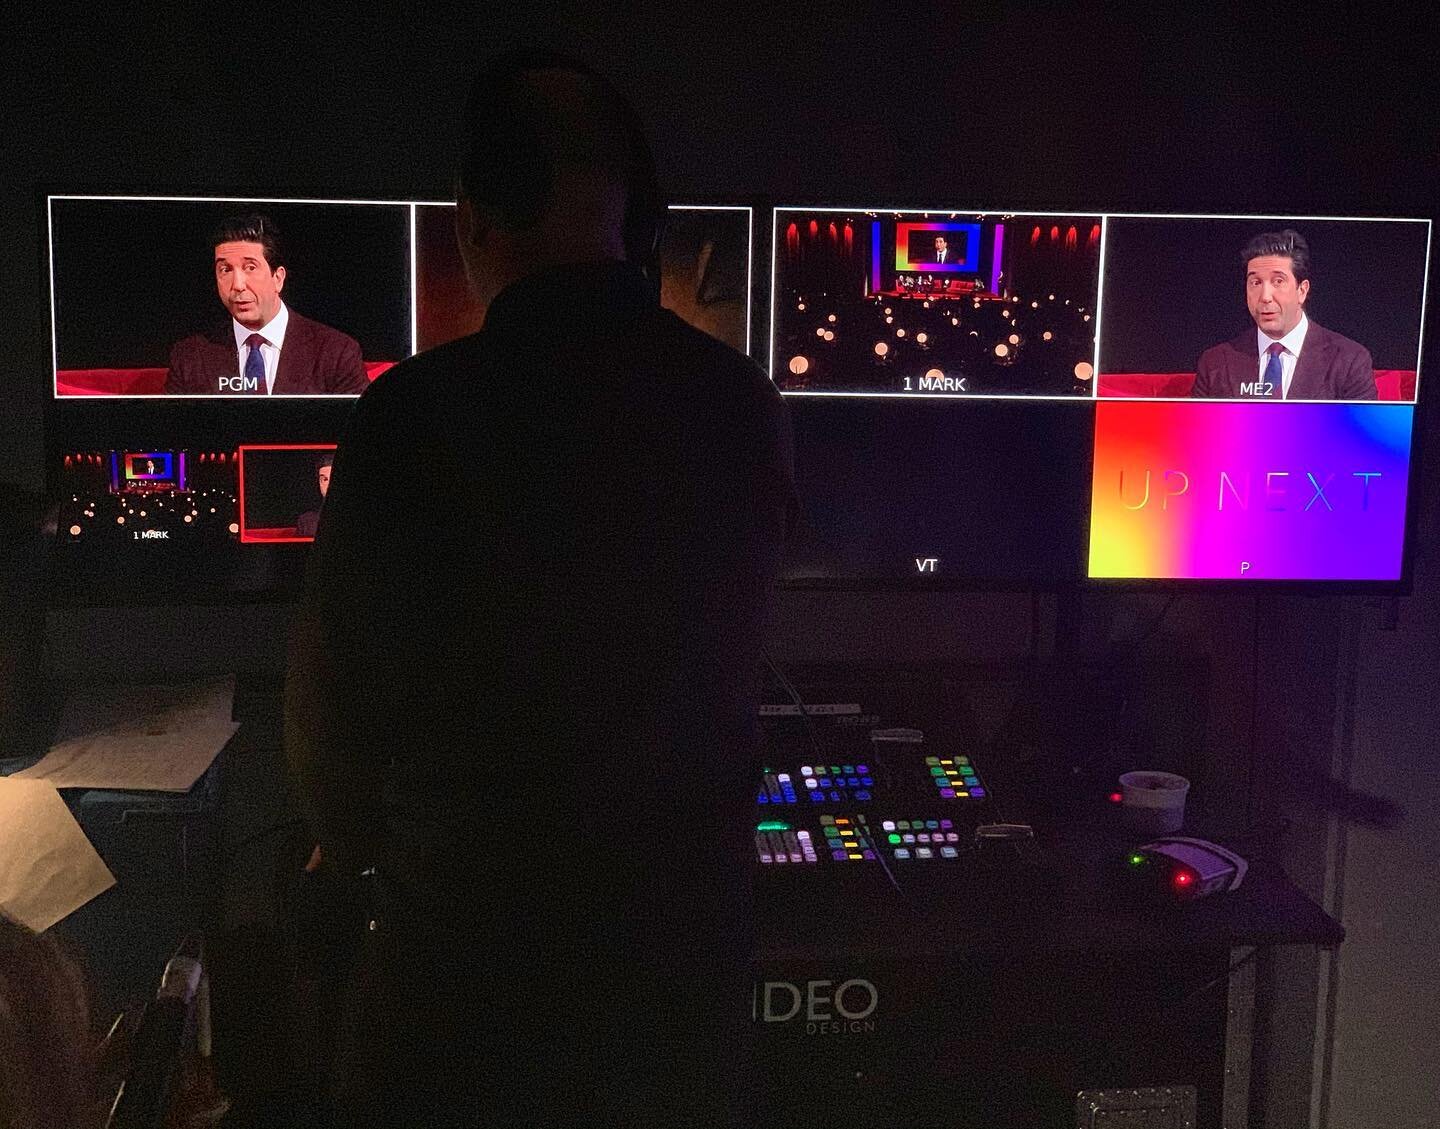 Multi-camera and live streaming production services were deployed big time for this major event at the @_tatemodern_ for Sky TV featuring #davidschwimmer and many others. #livevent #premier #multicamera #livestreaming